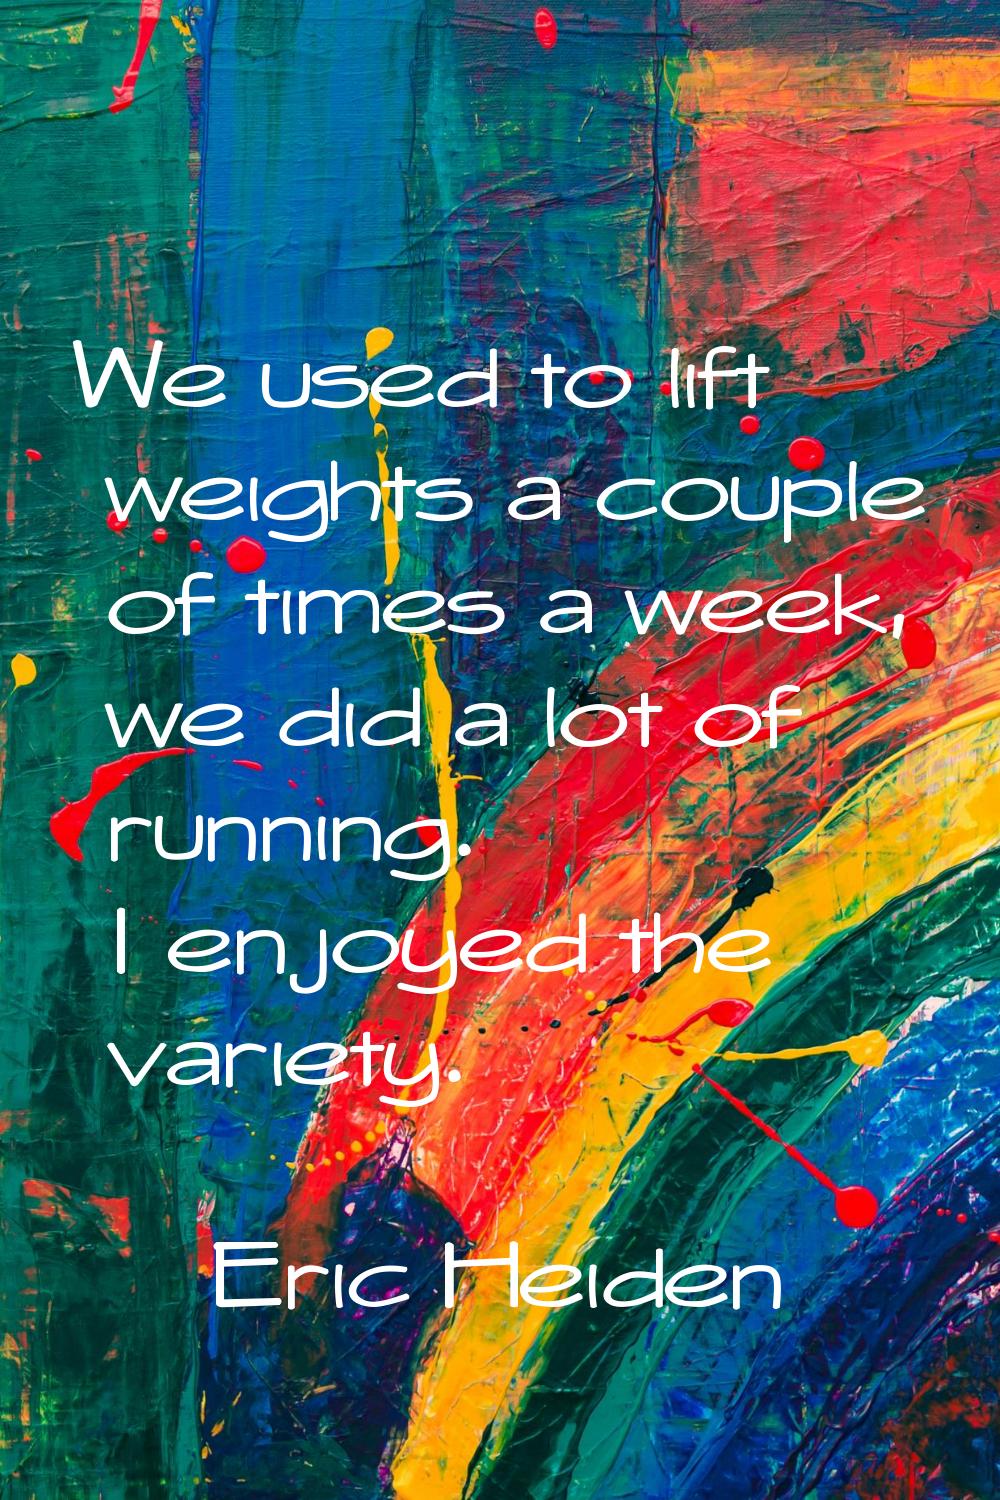 We used to lift weights a couple of times a week, we did a lot of running. I enjoyed the variety.